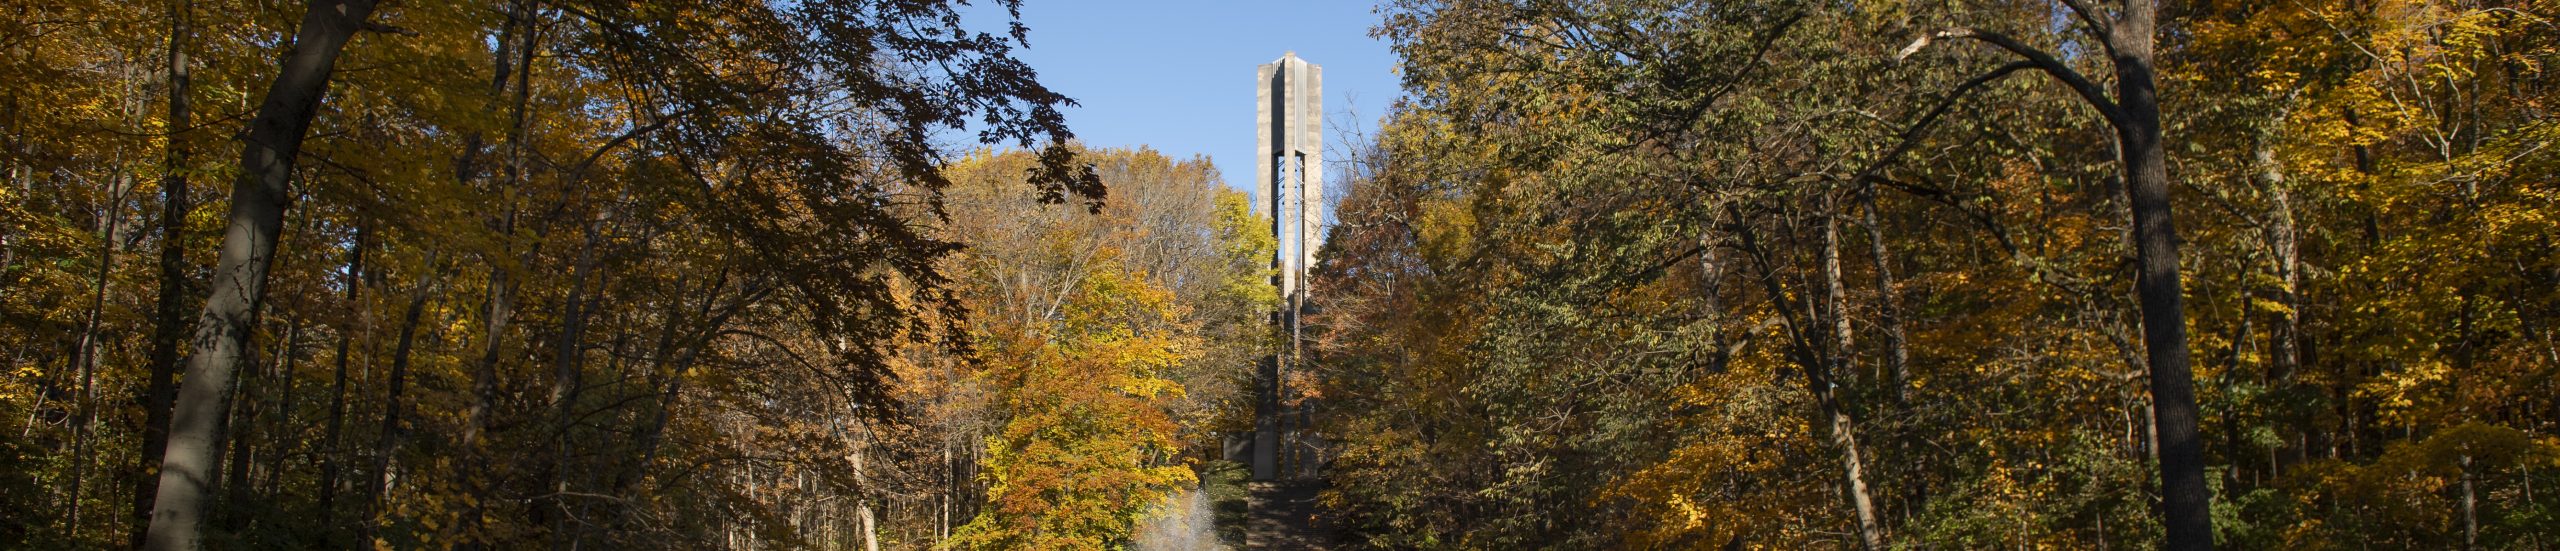 A photo of the Carillon in the distance, framed by trees.